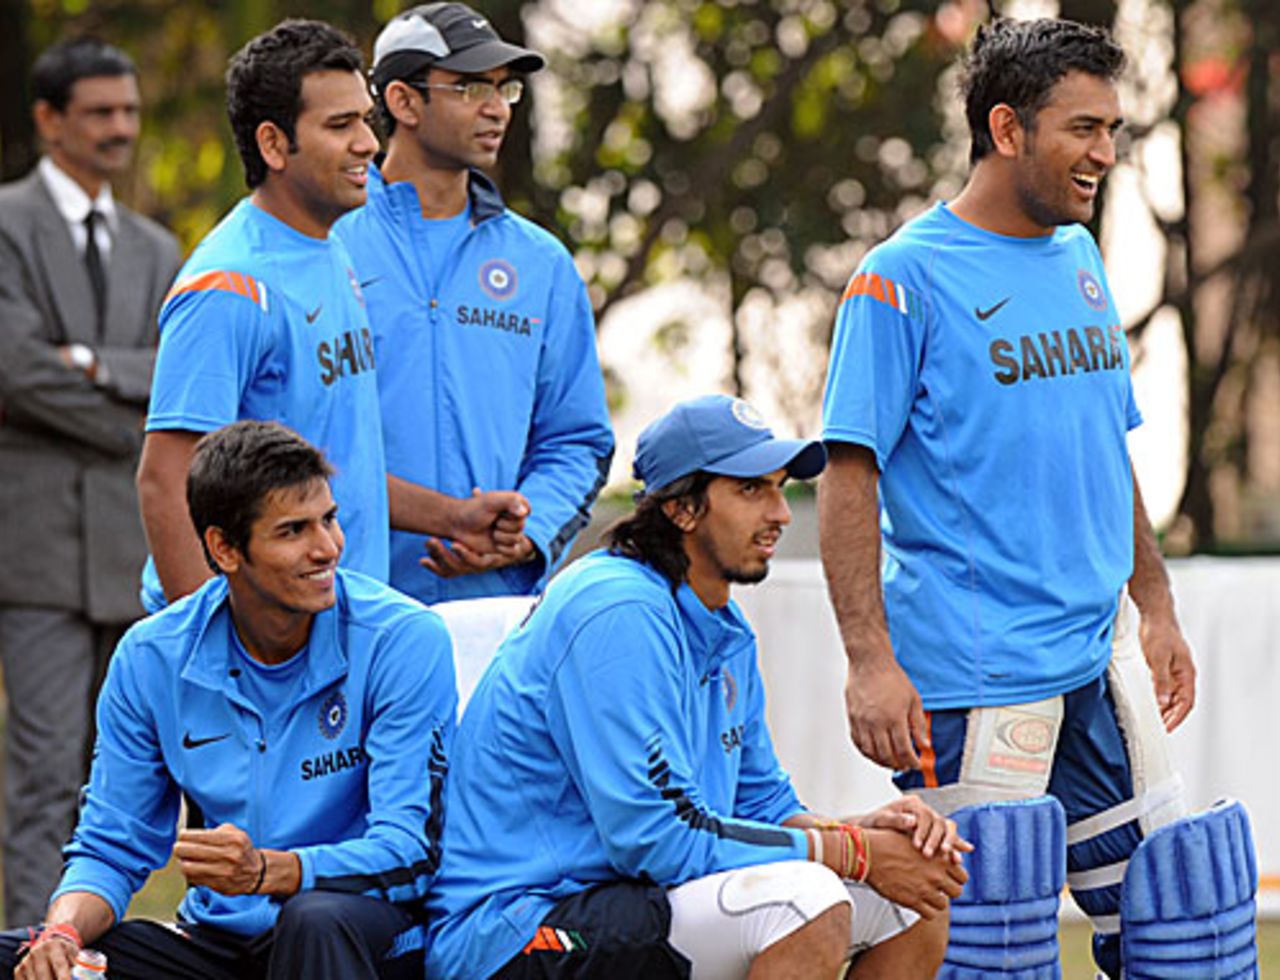 A few Indian players look on in amusement, Mohali, December 11, 2009